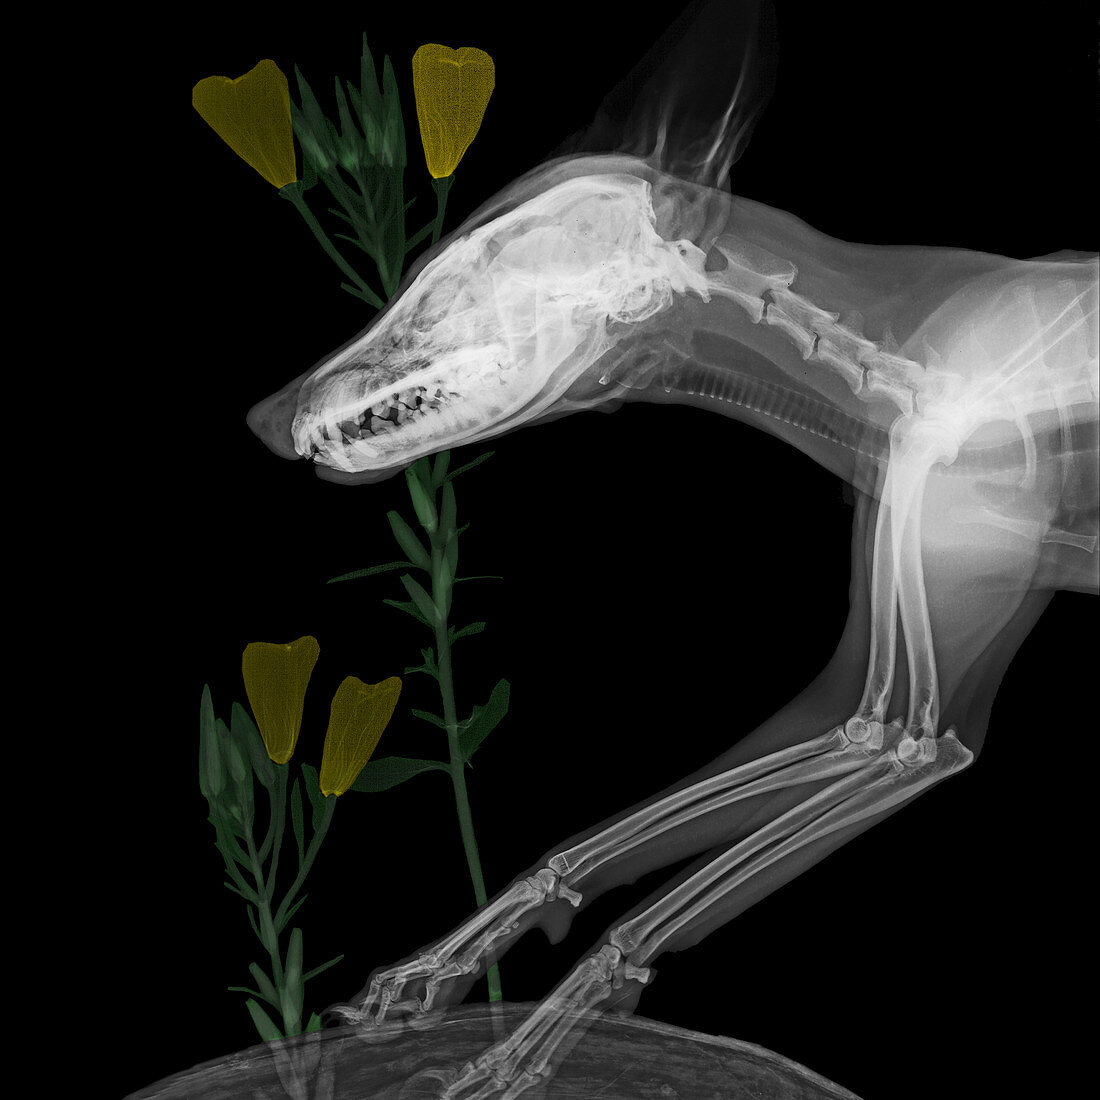 Fox and flowers,X-ray